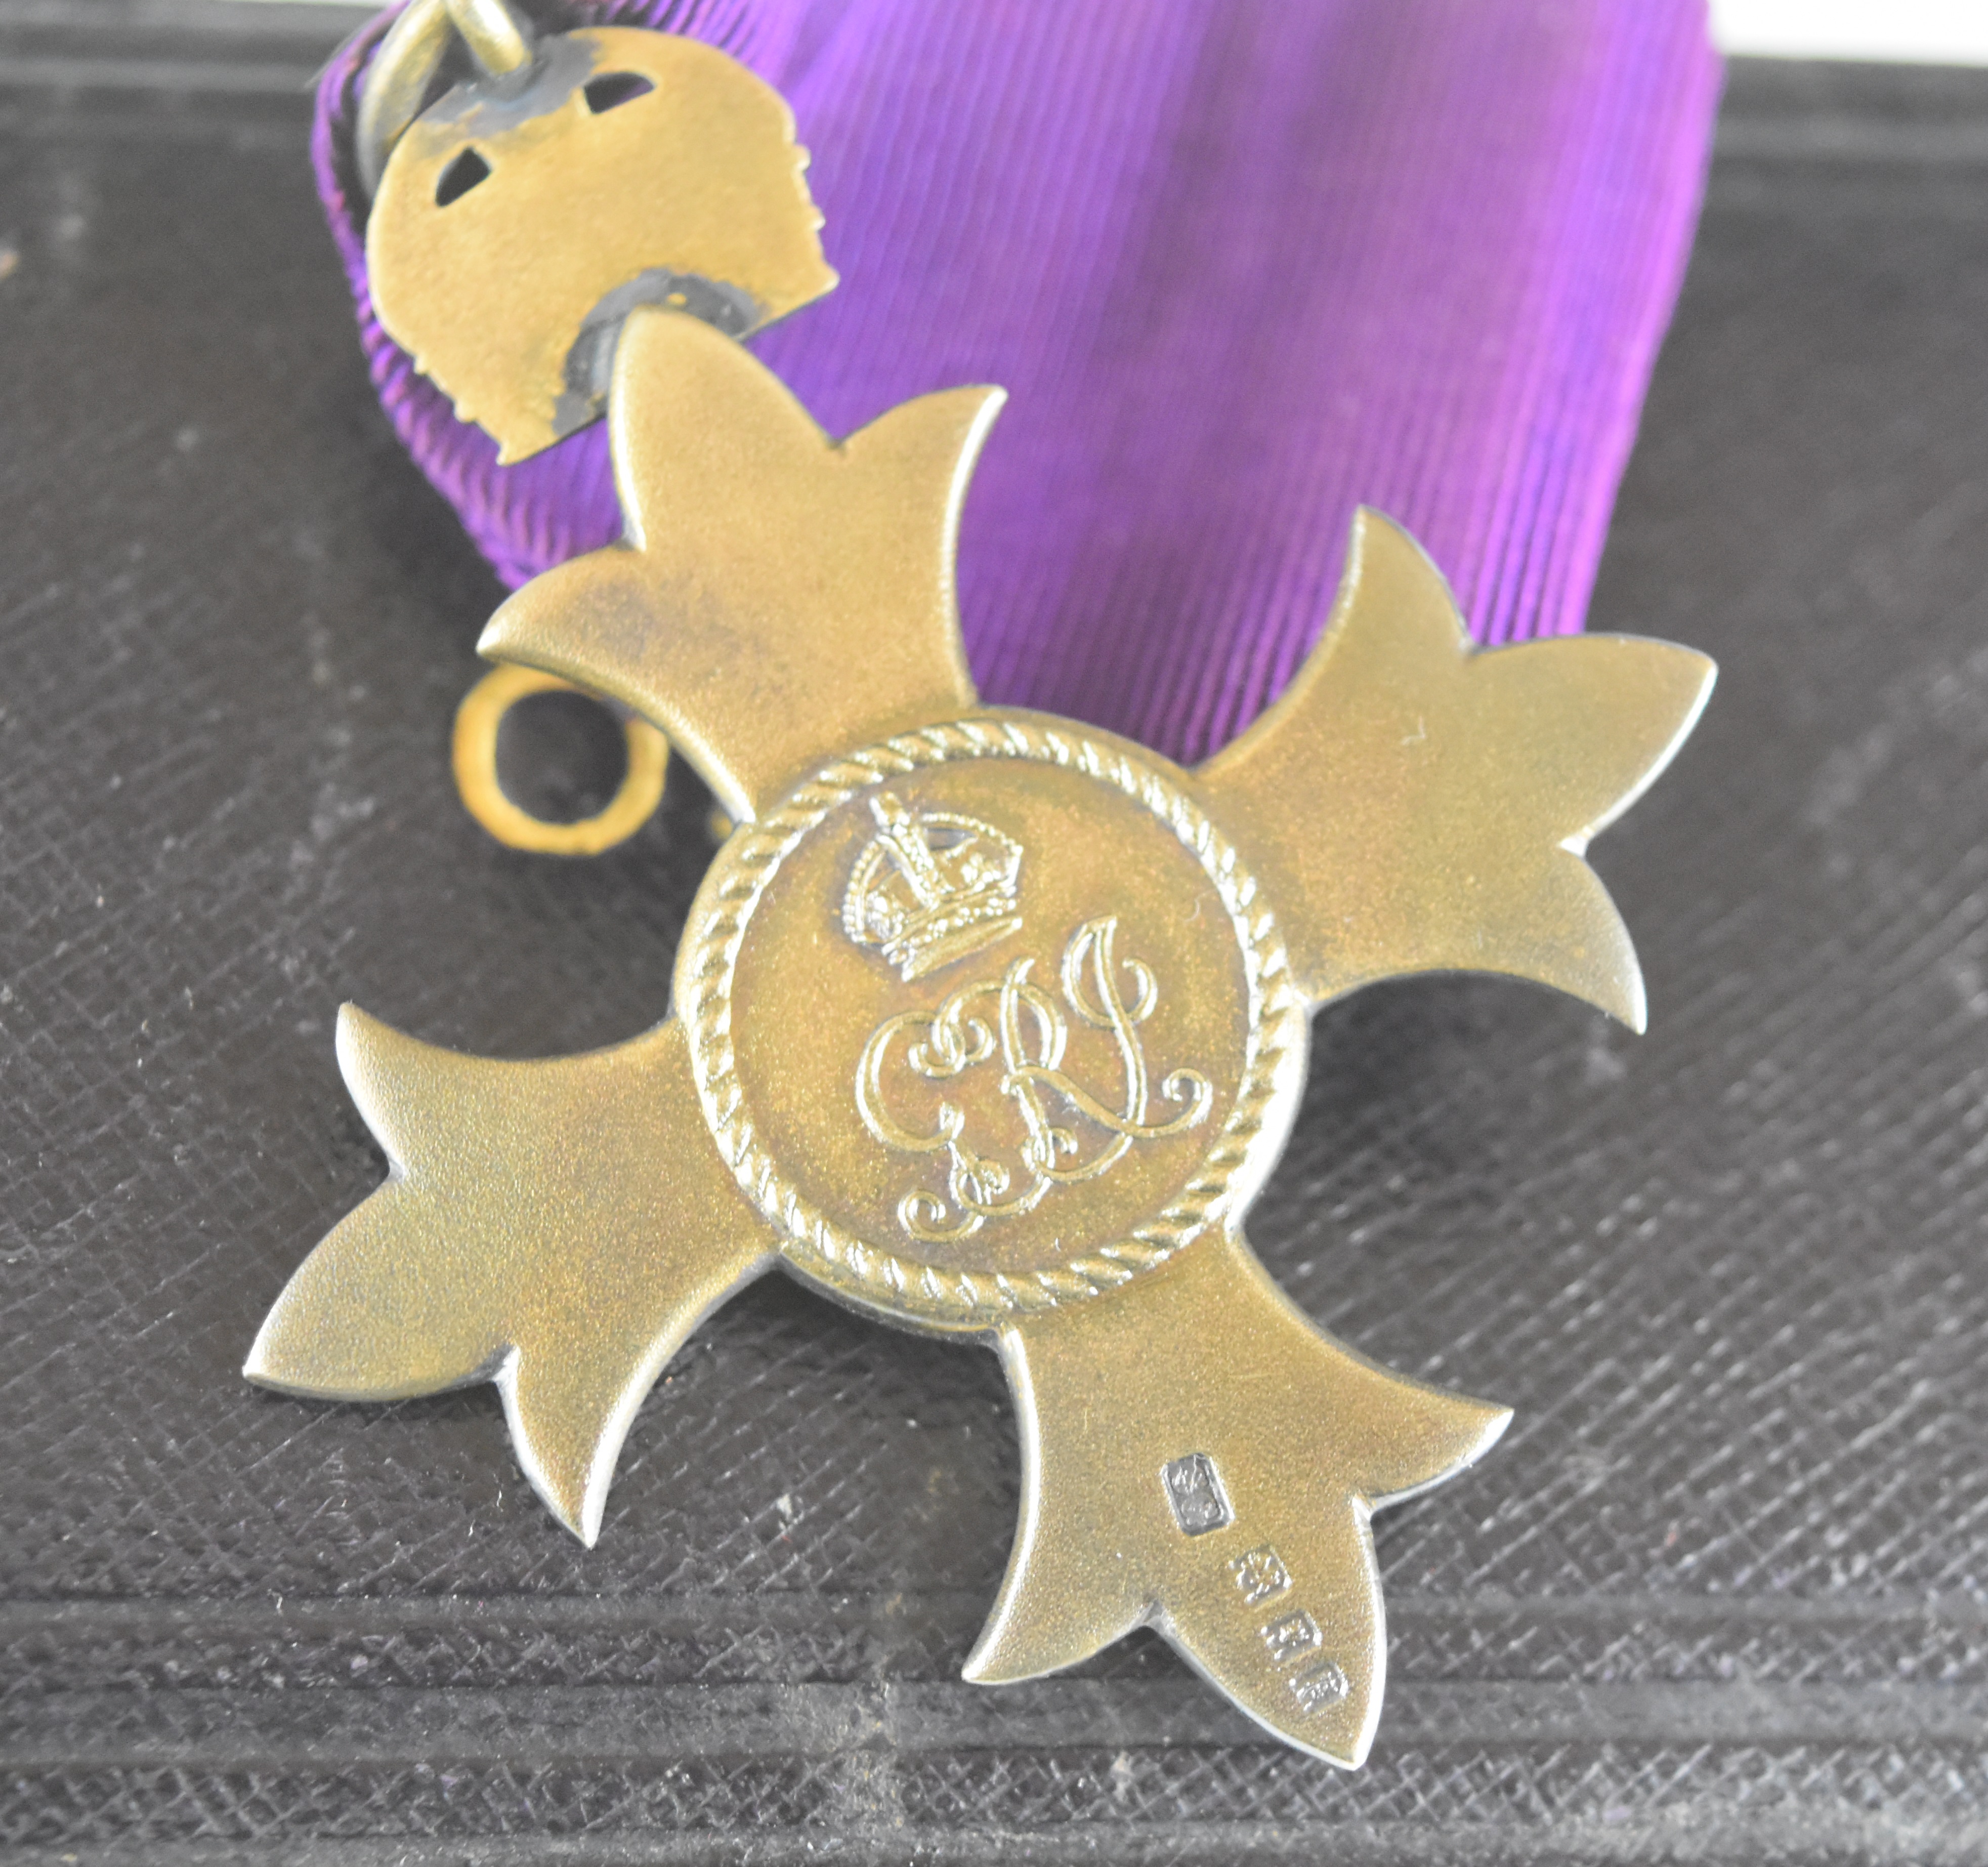 The Most Excellent Order of the British Empire Officer's award, OBE Civil Division, in Garrard - Image 4 of 5